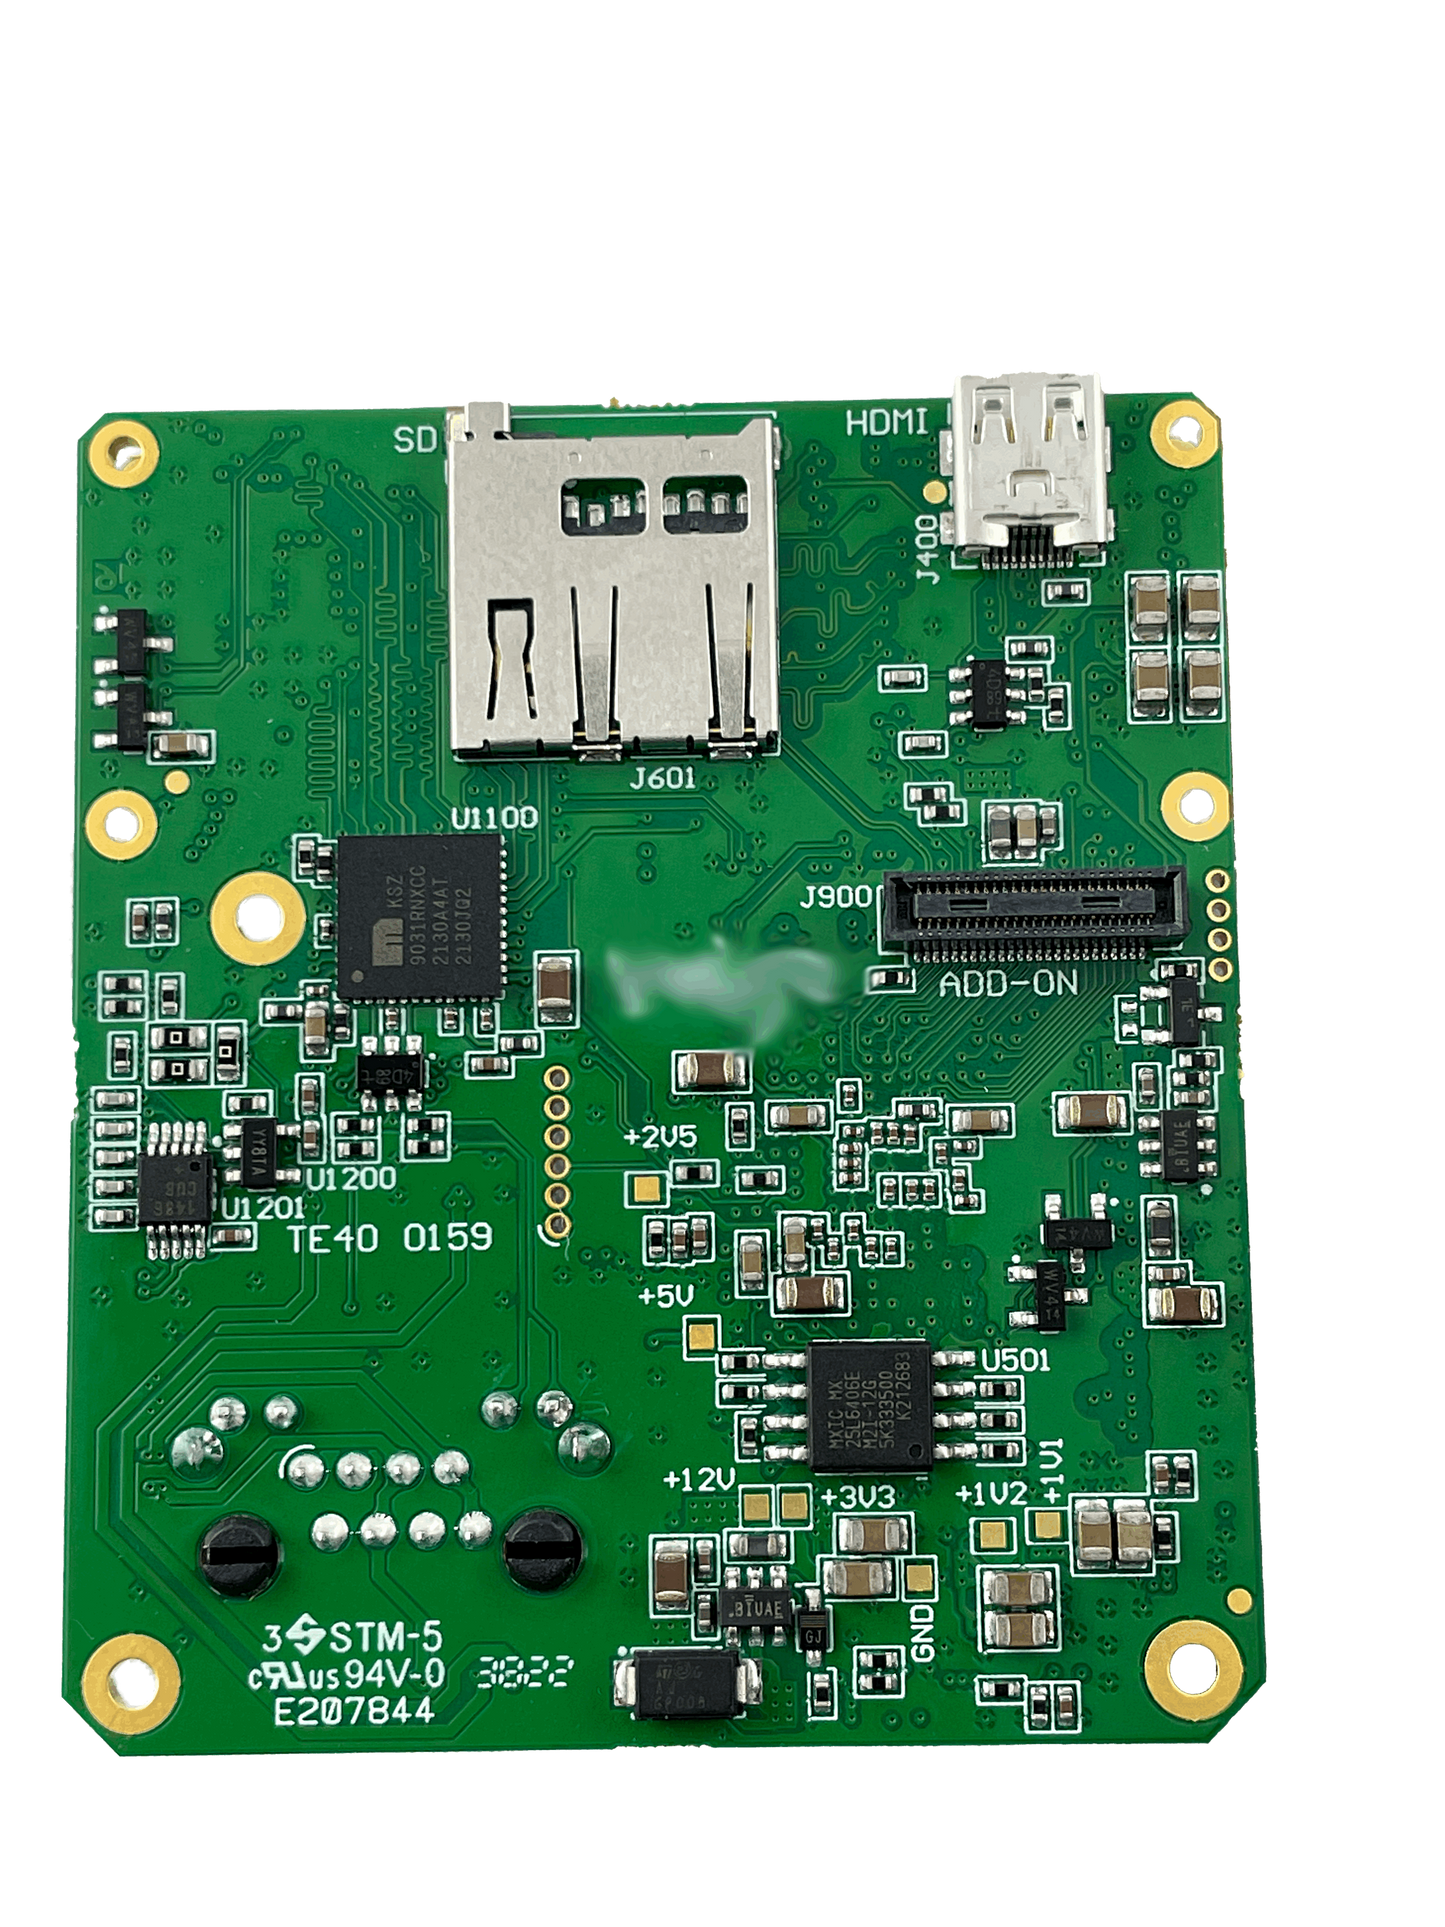 H.264/H.265 IP Video Streaming Interface Boards for HD and 4K Block Cameras Bottom View